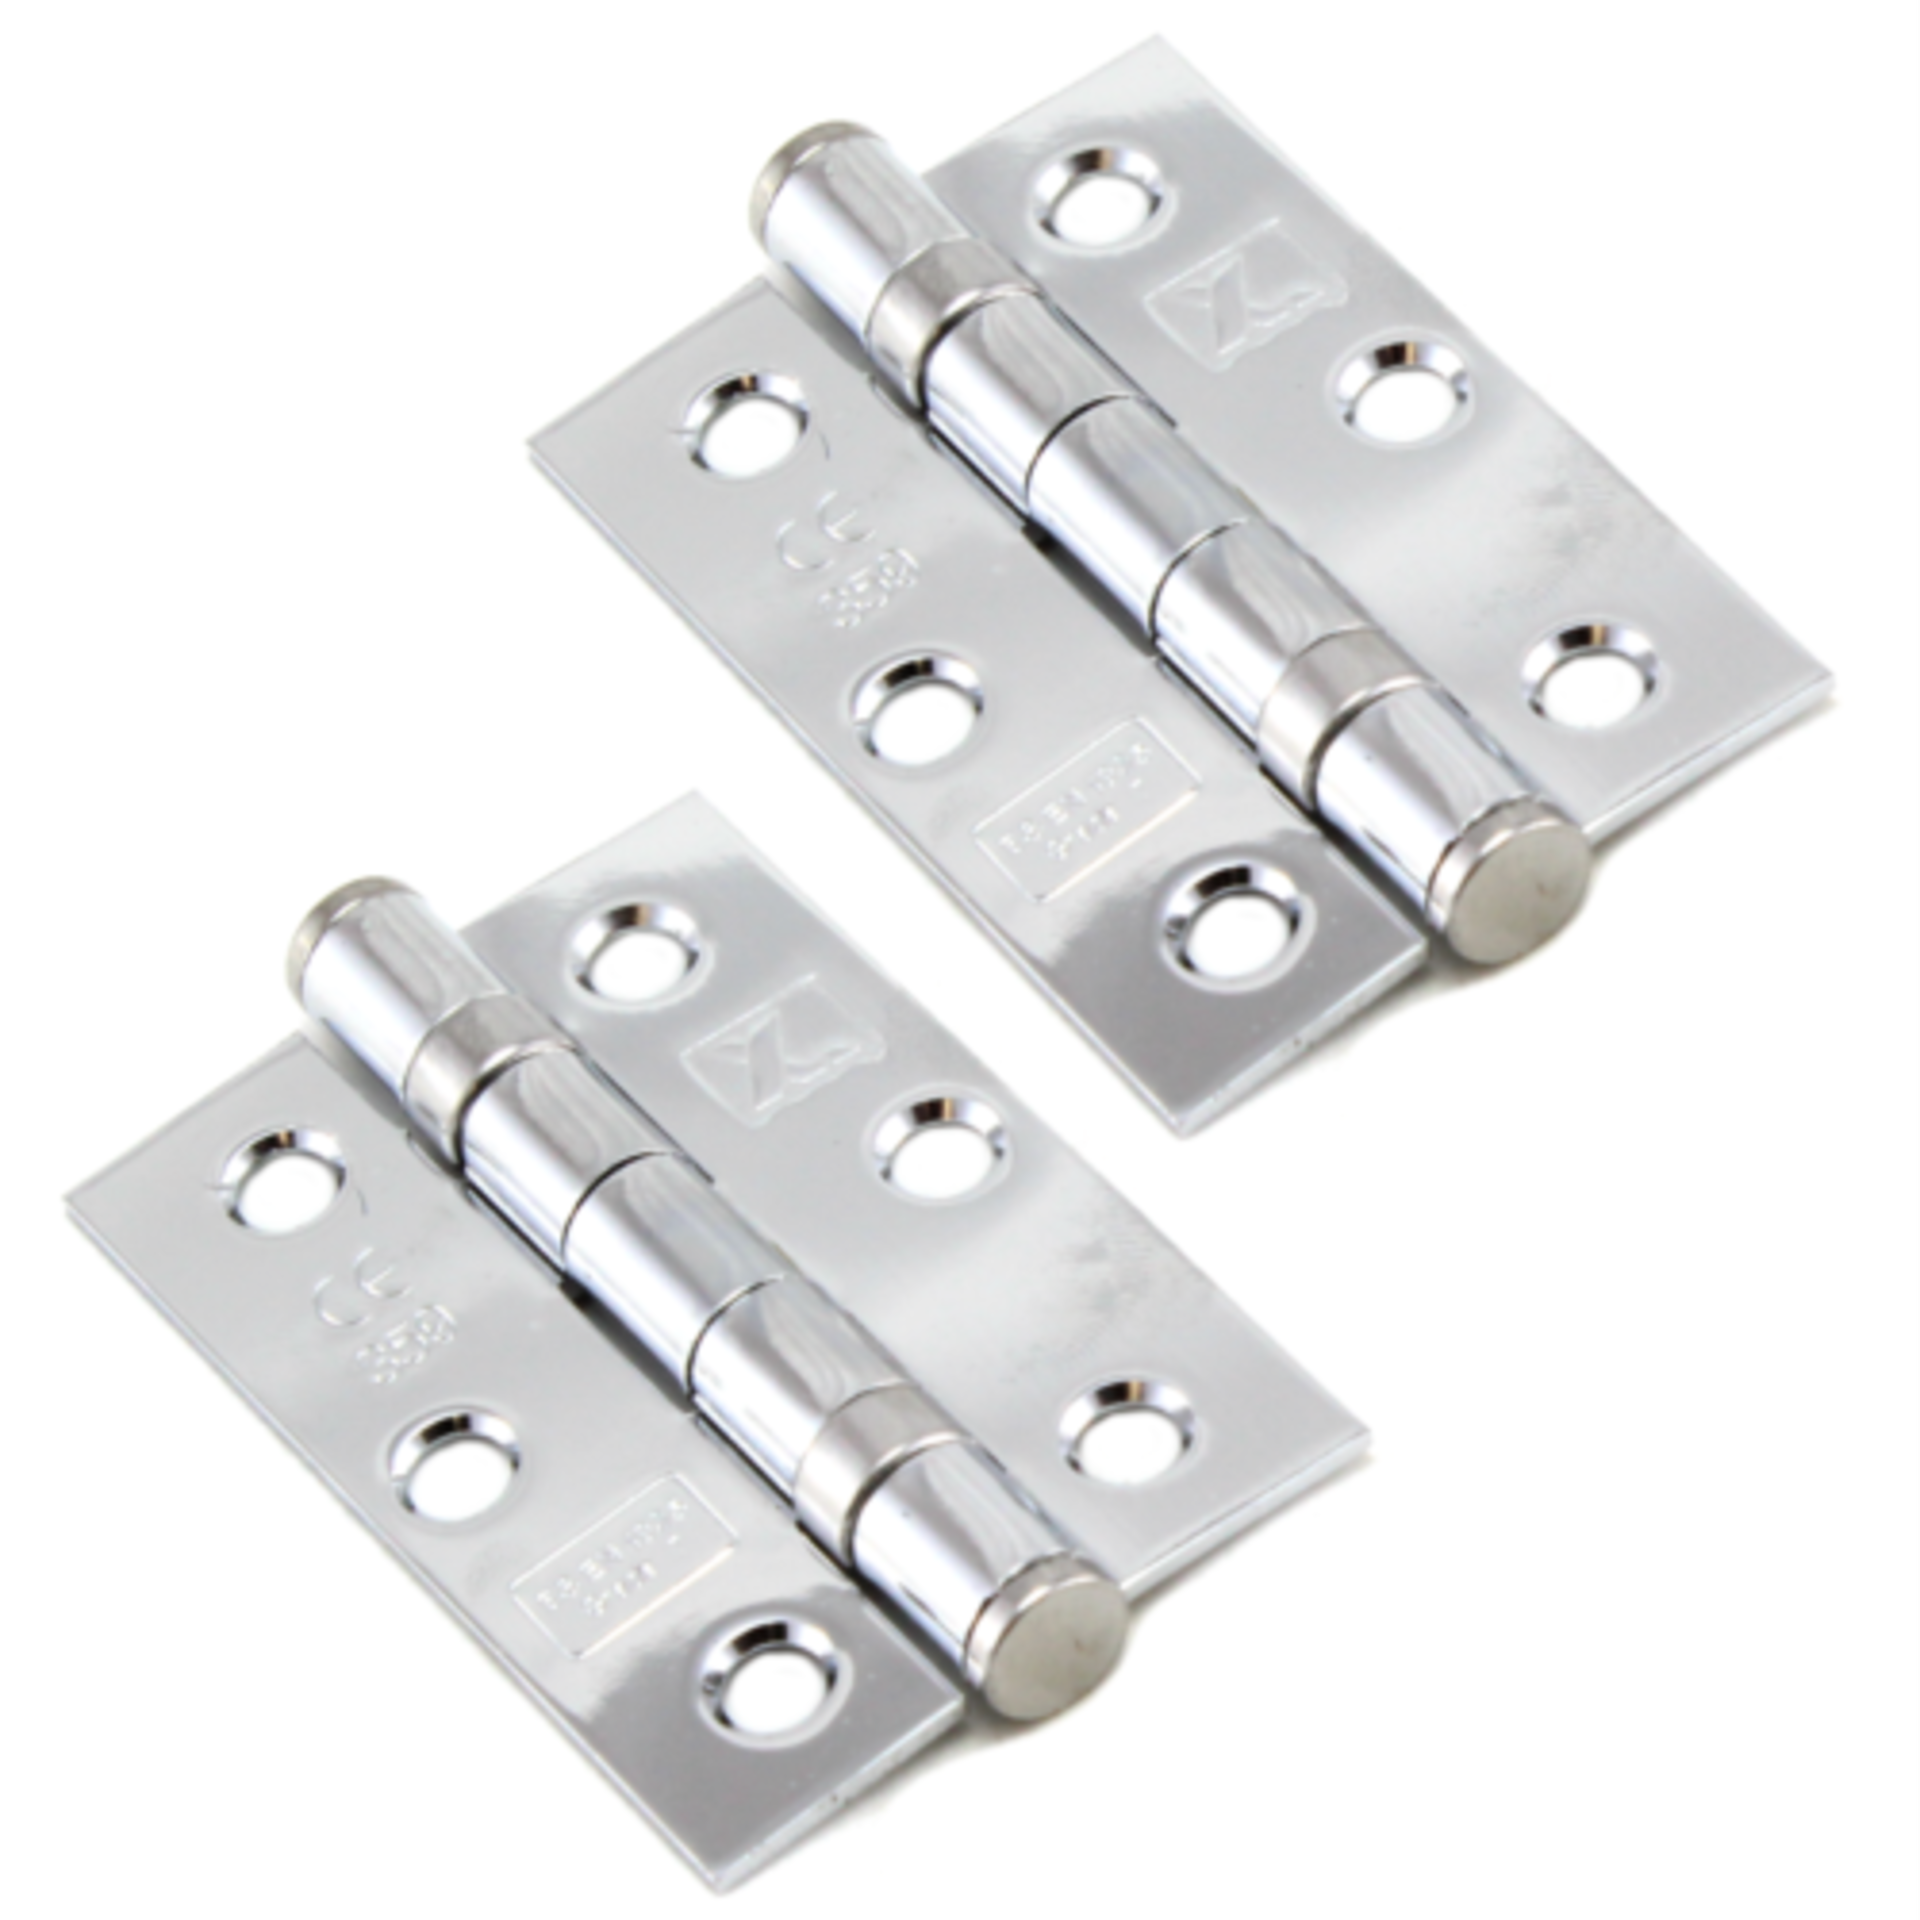 10 Pairs Of 3x 2 Excel Hinges Xl962 Fire Rated